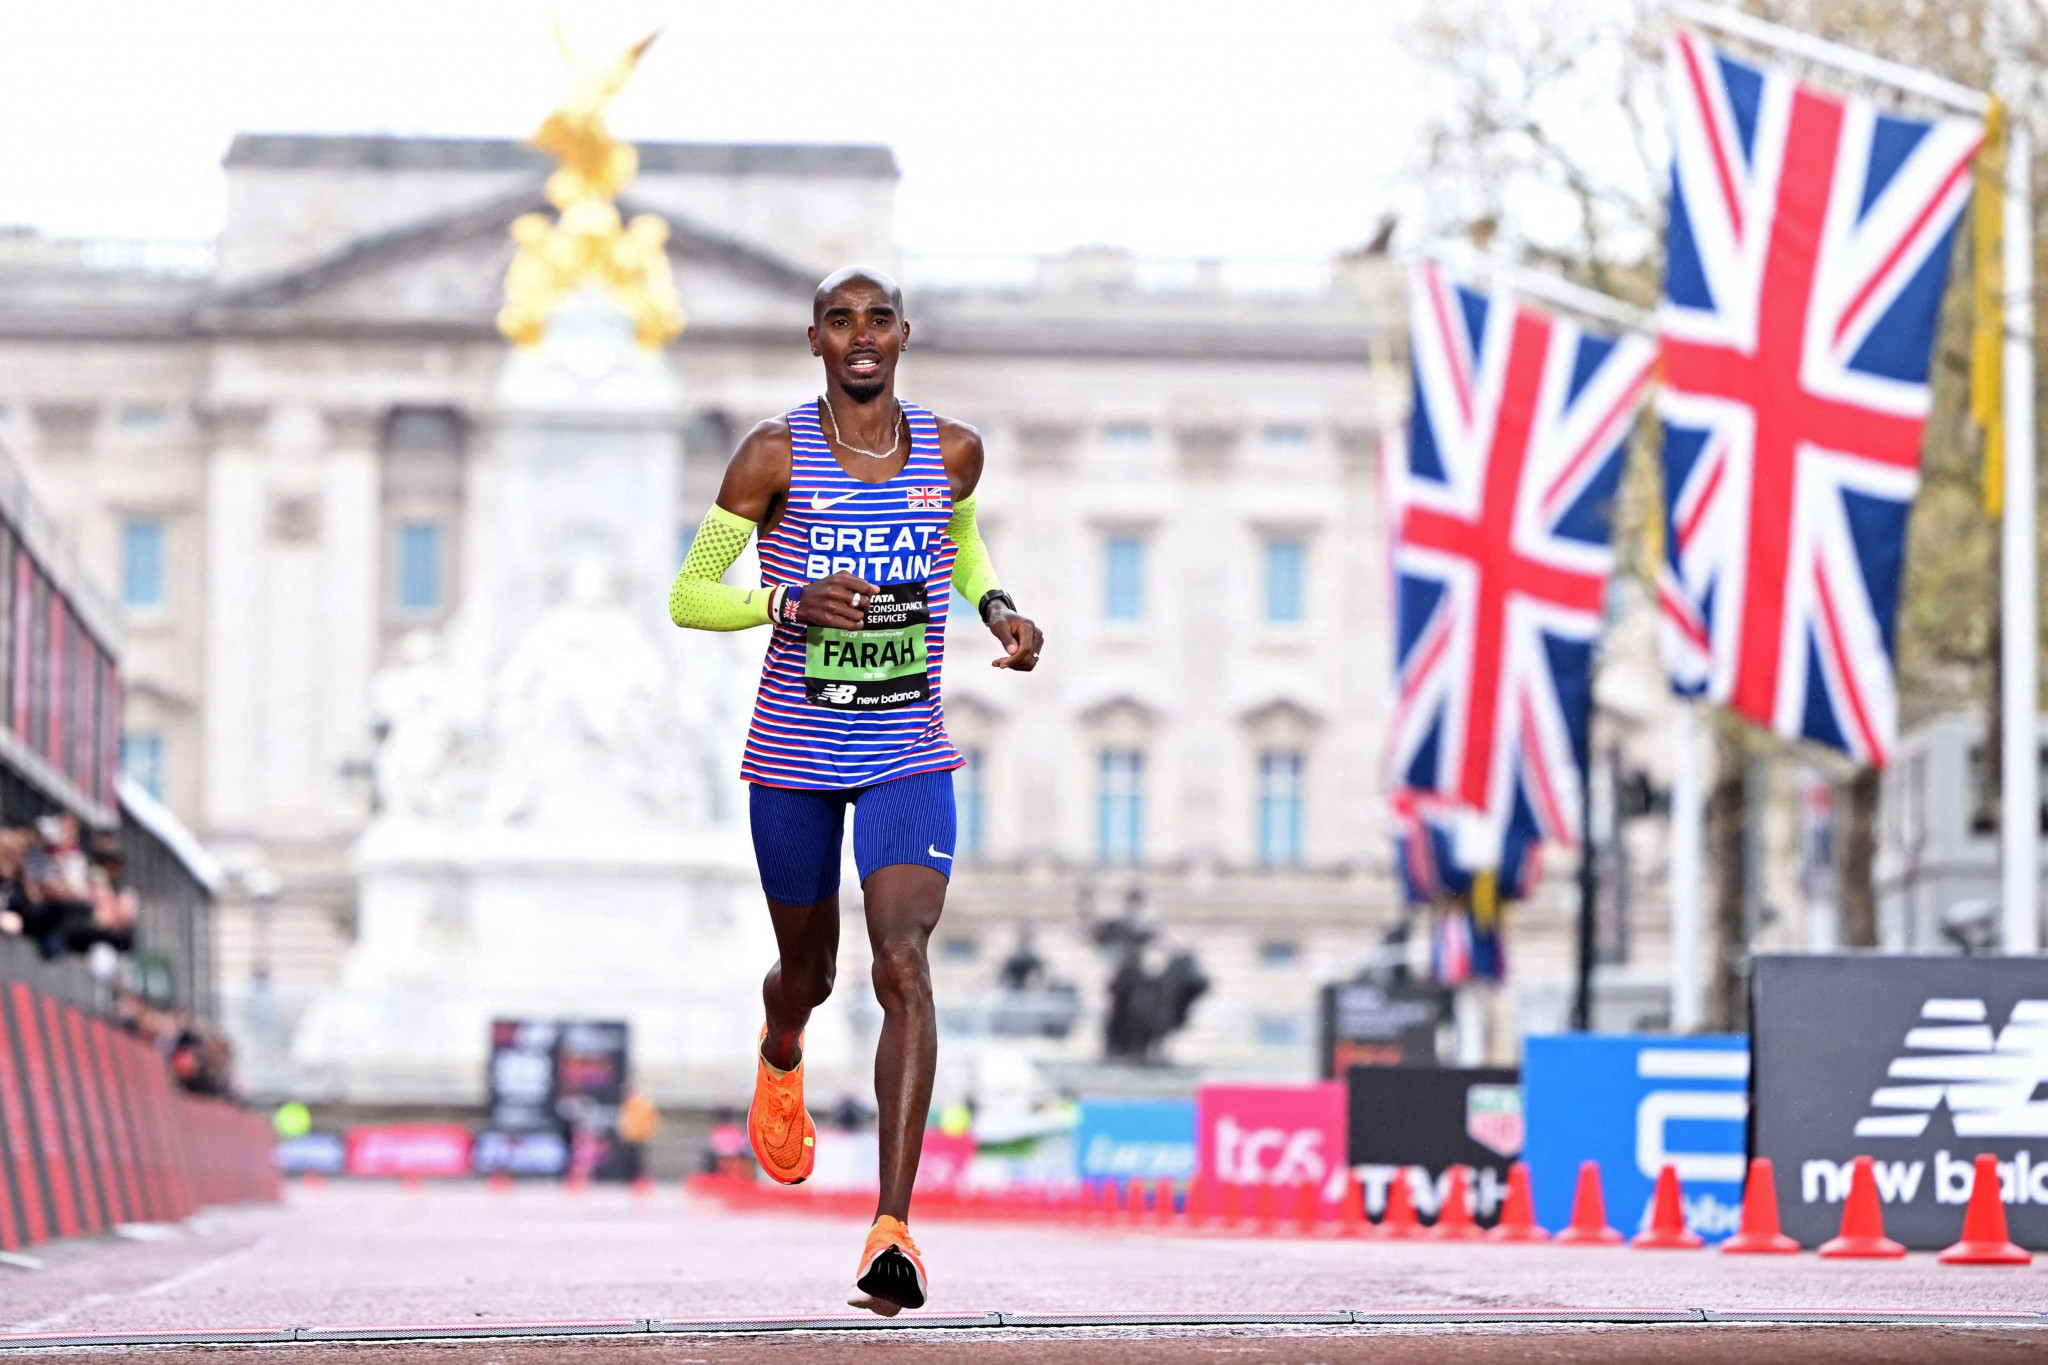 Britain's four-time Olympic gold medallist Sir Mo Farah finished ninth in what could be his last marathon ©Getty Images